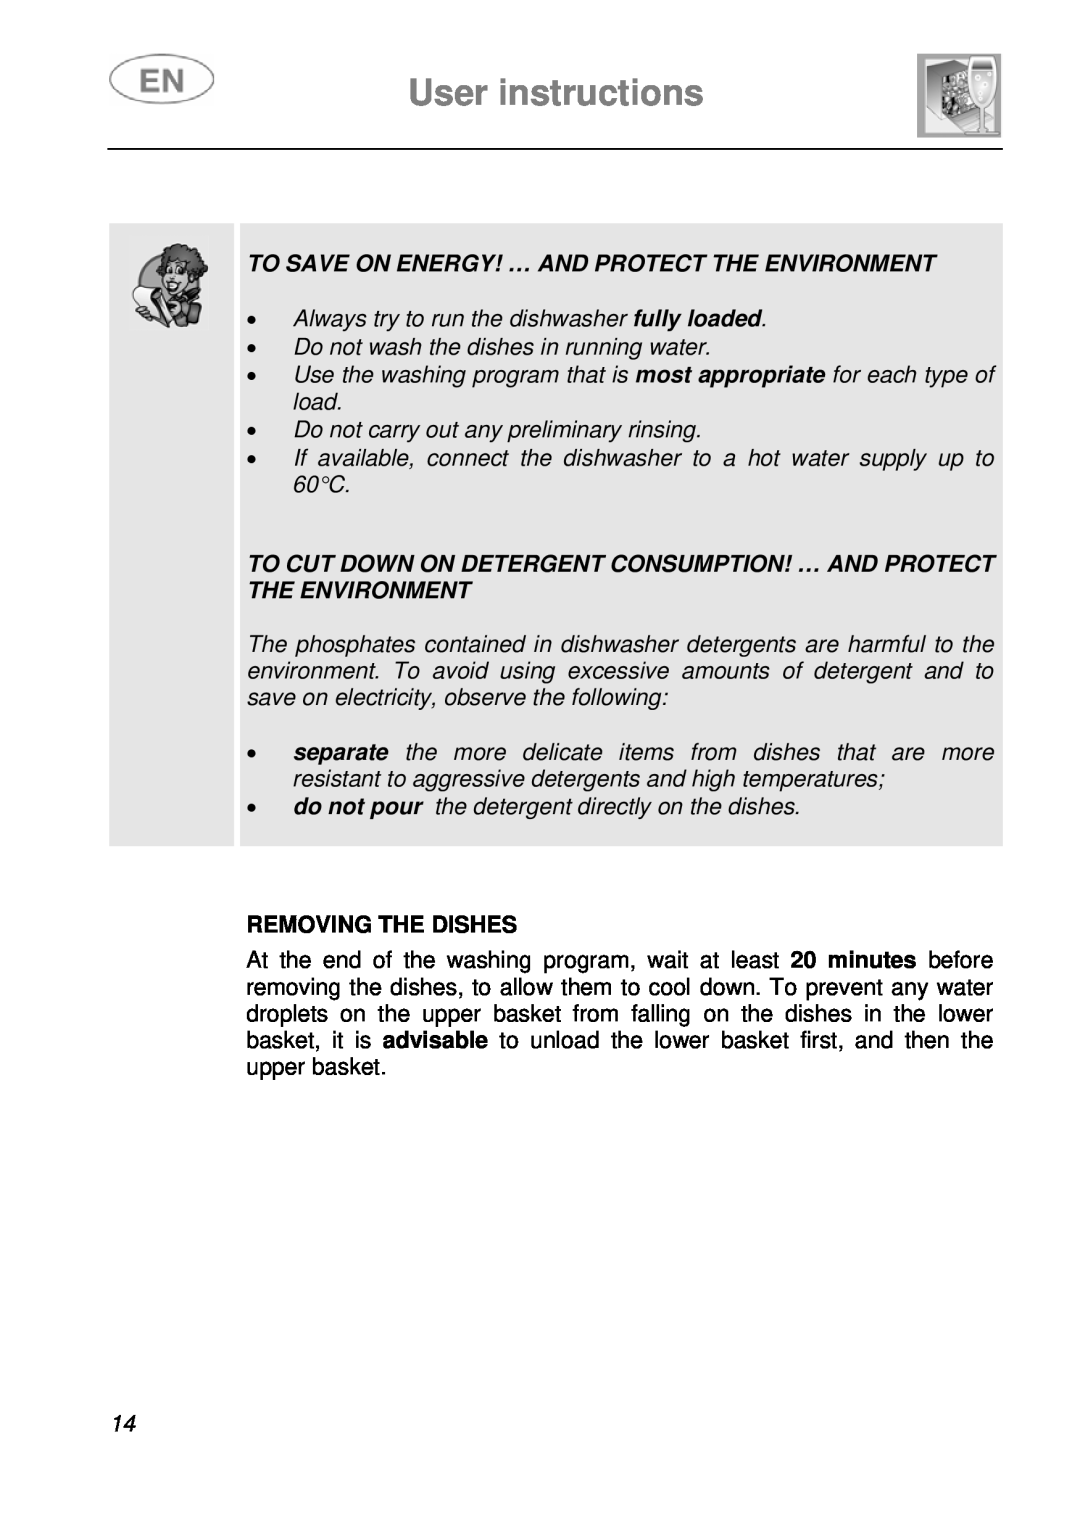 Smeg KLS55B instruction manual To Save On Energy! … And Protect The Environment, Removing The Dishes, User instructions 